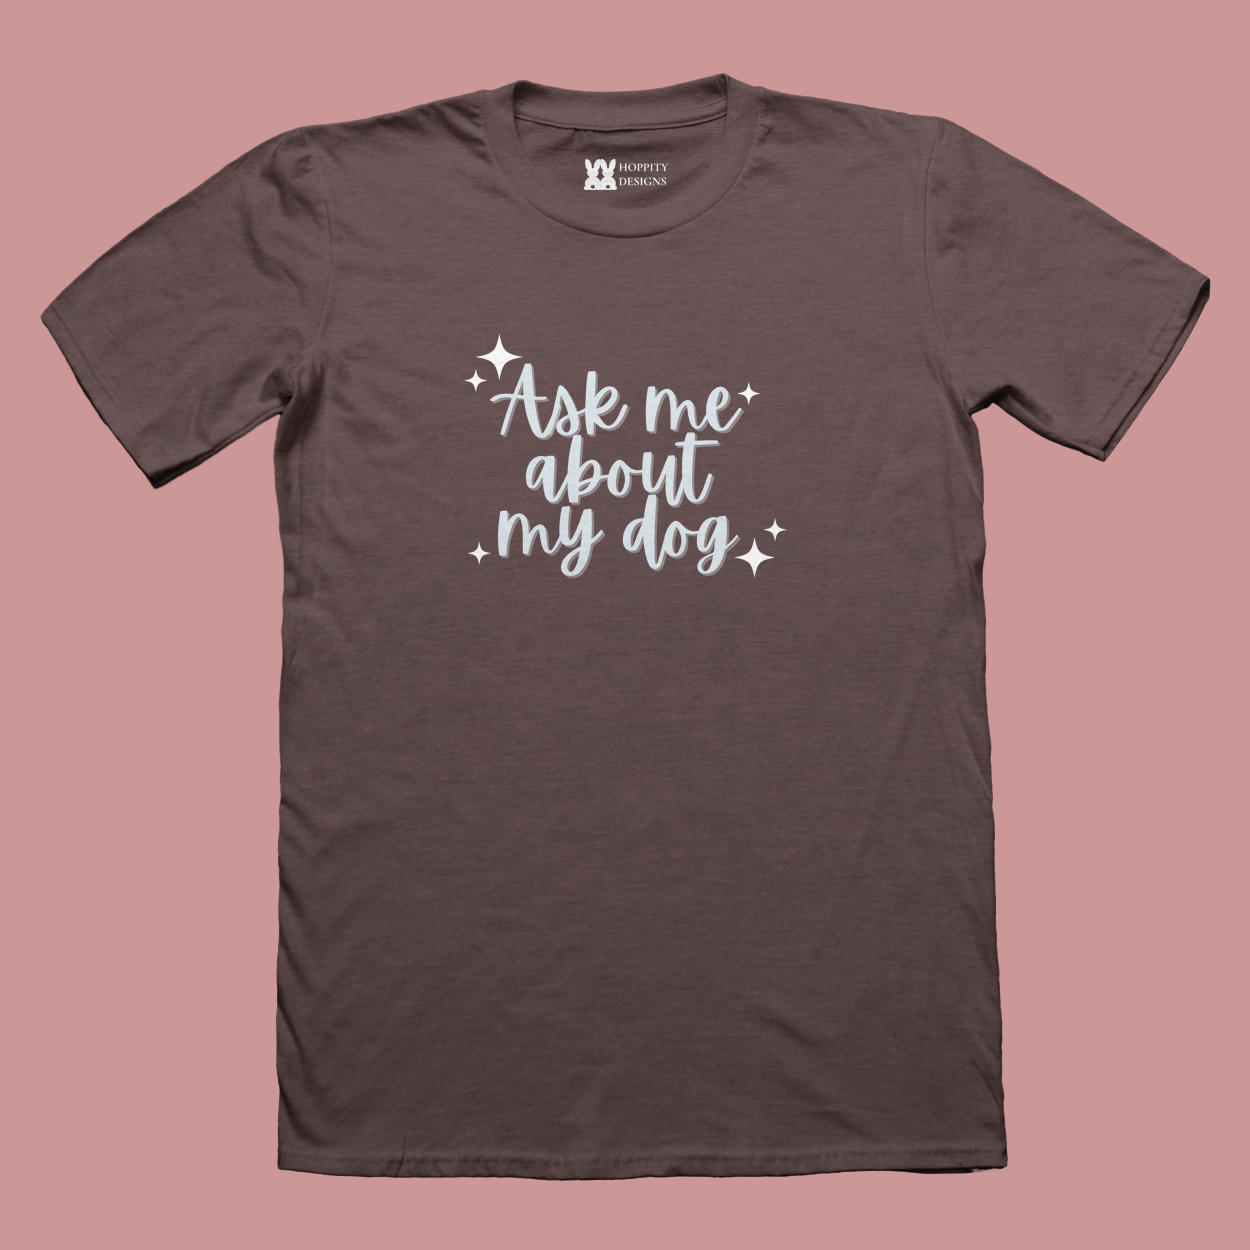 Brown T-Shirt with "Ask me about my dog" printed in pastel blue